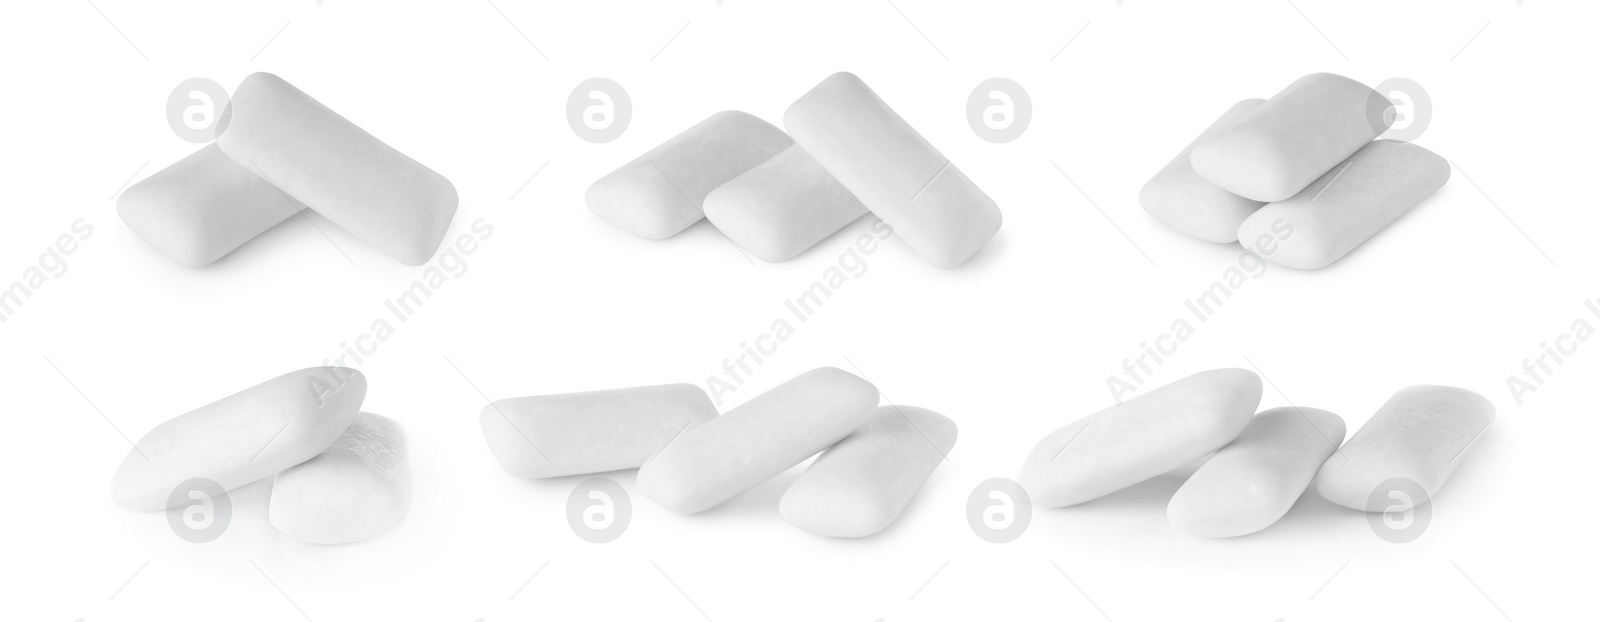 Image of Pellet chewing gums isolated on white, set